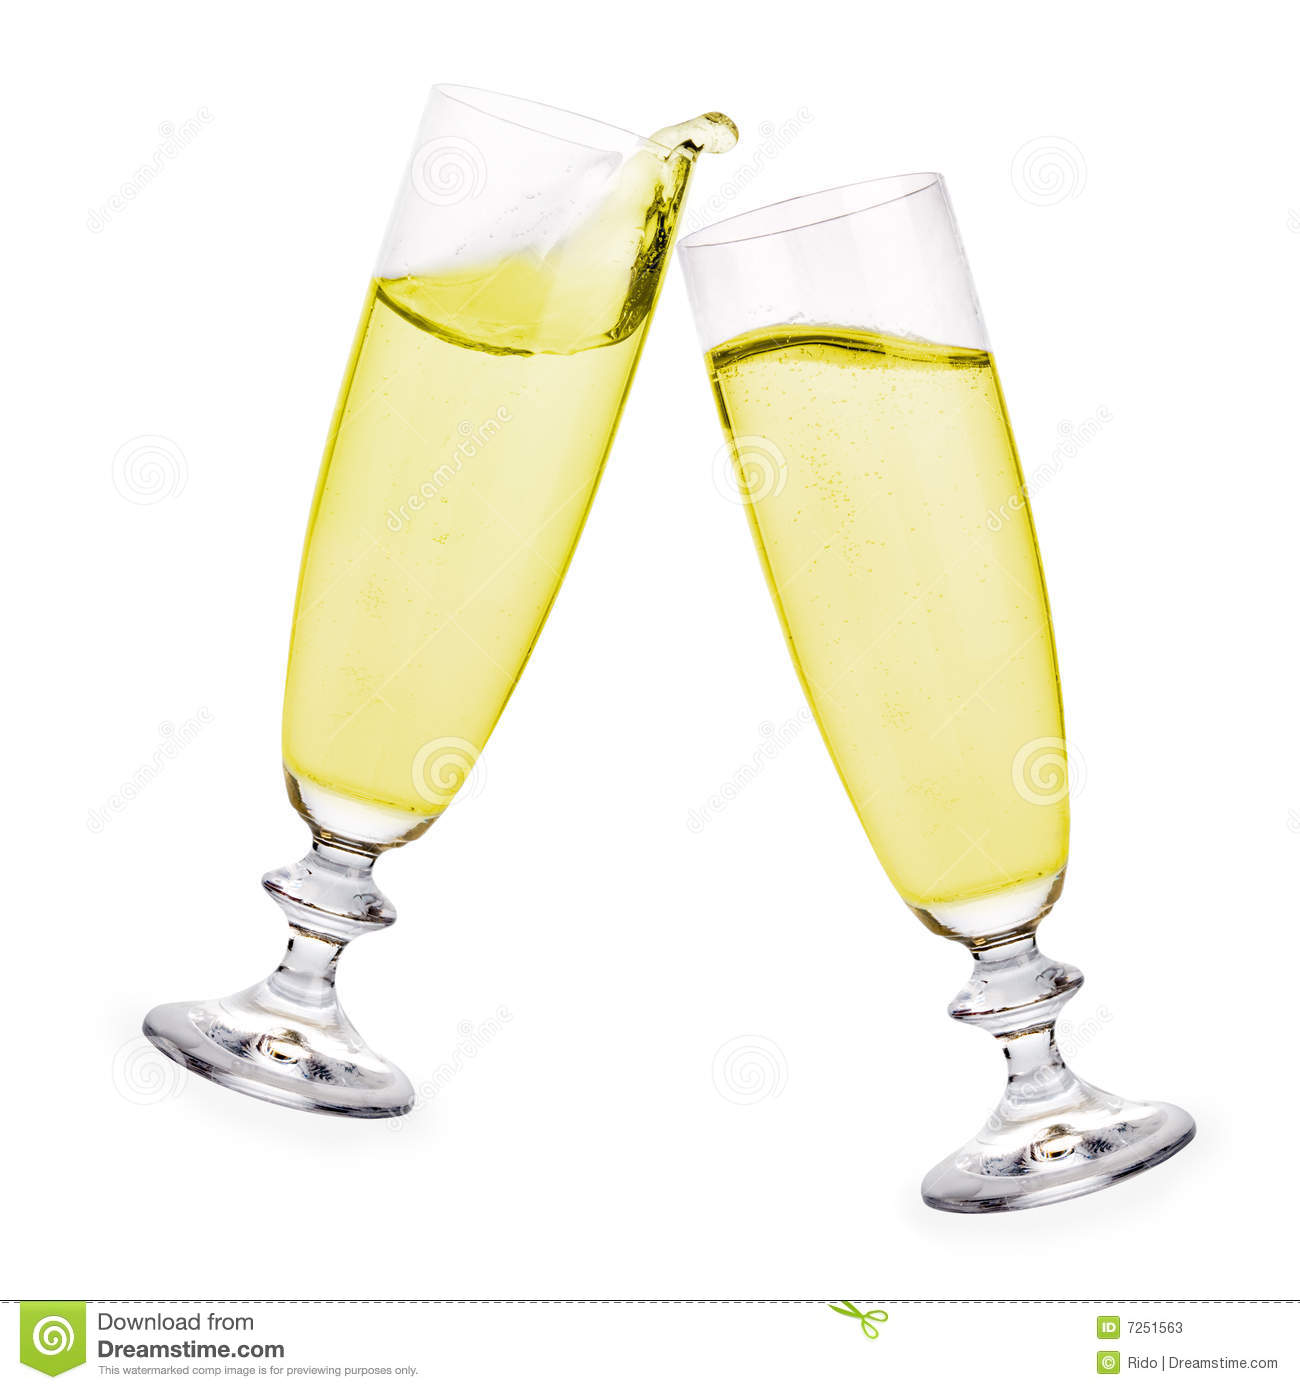 Of Champagne Flutes Making A Toast To Celebrate A Very Special Day